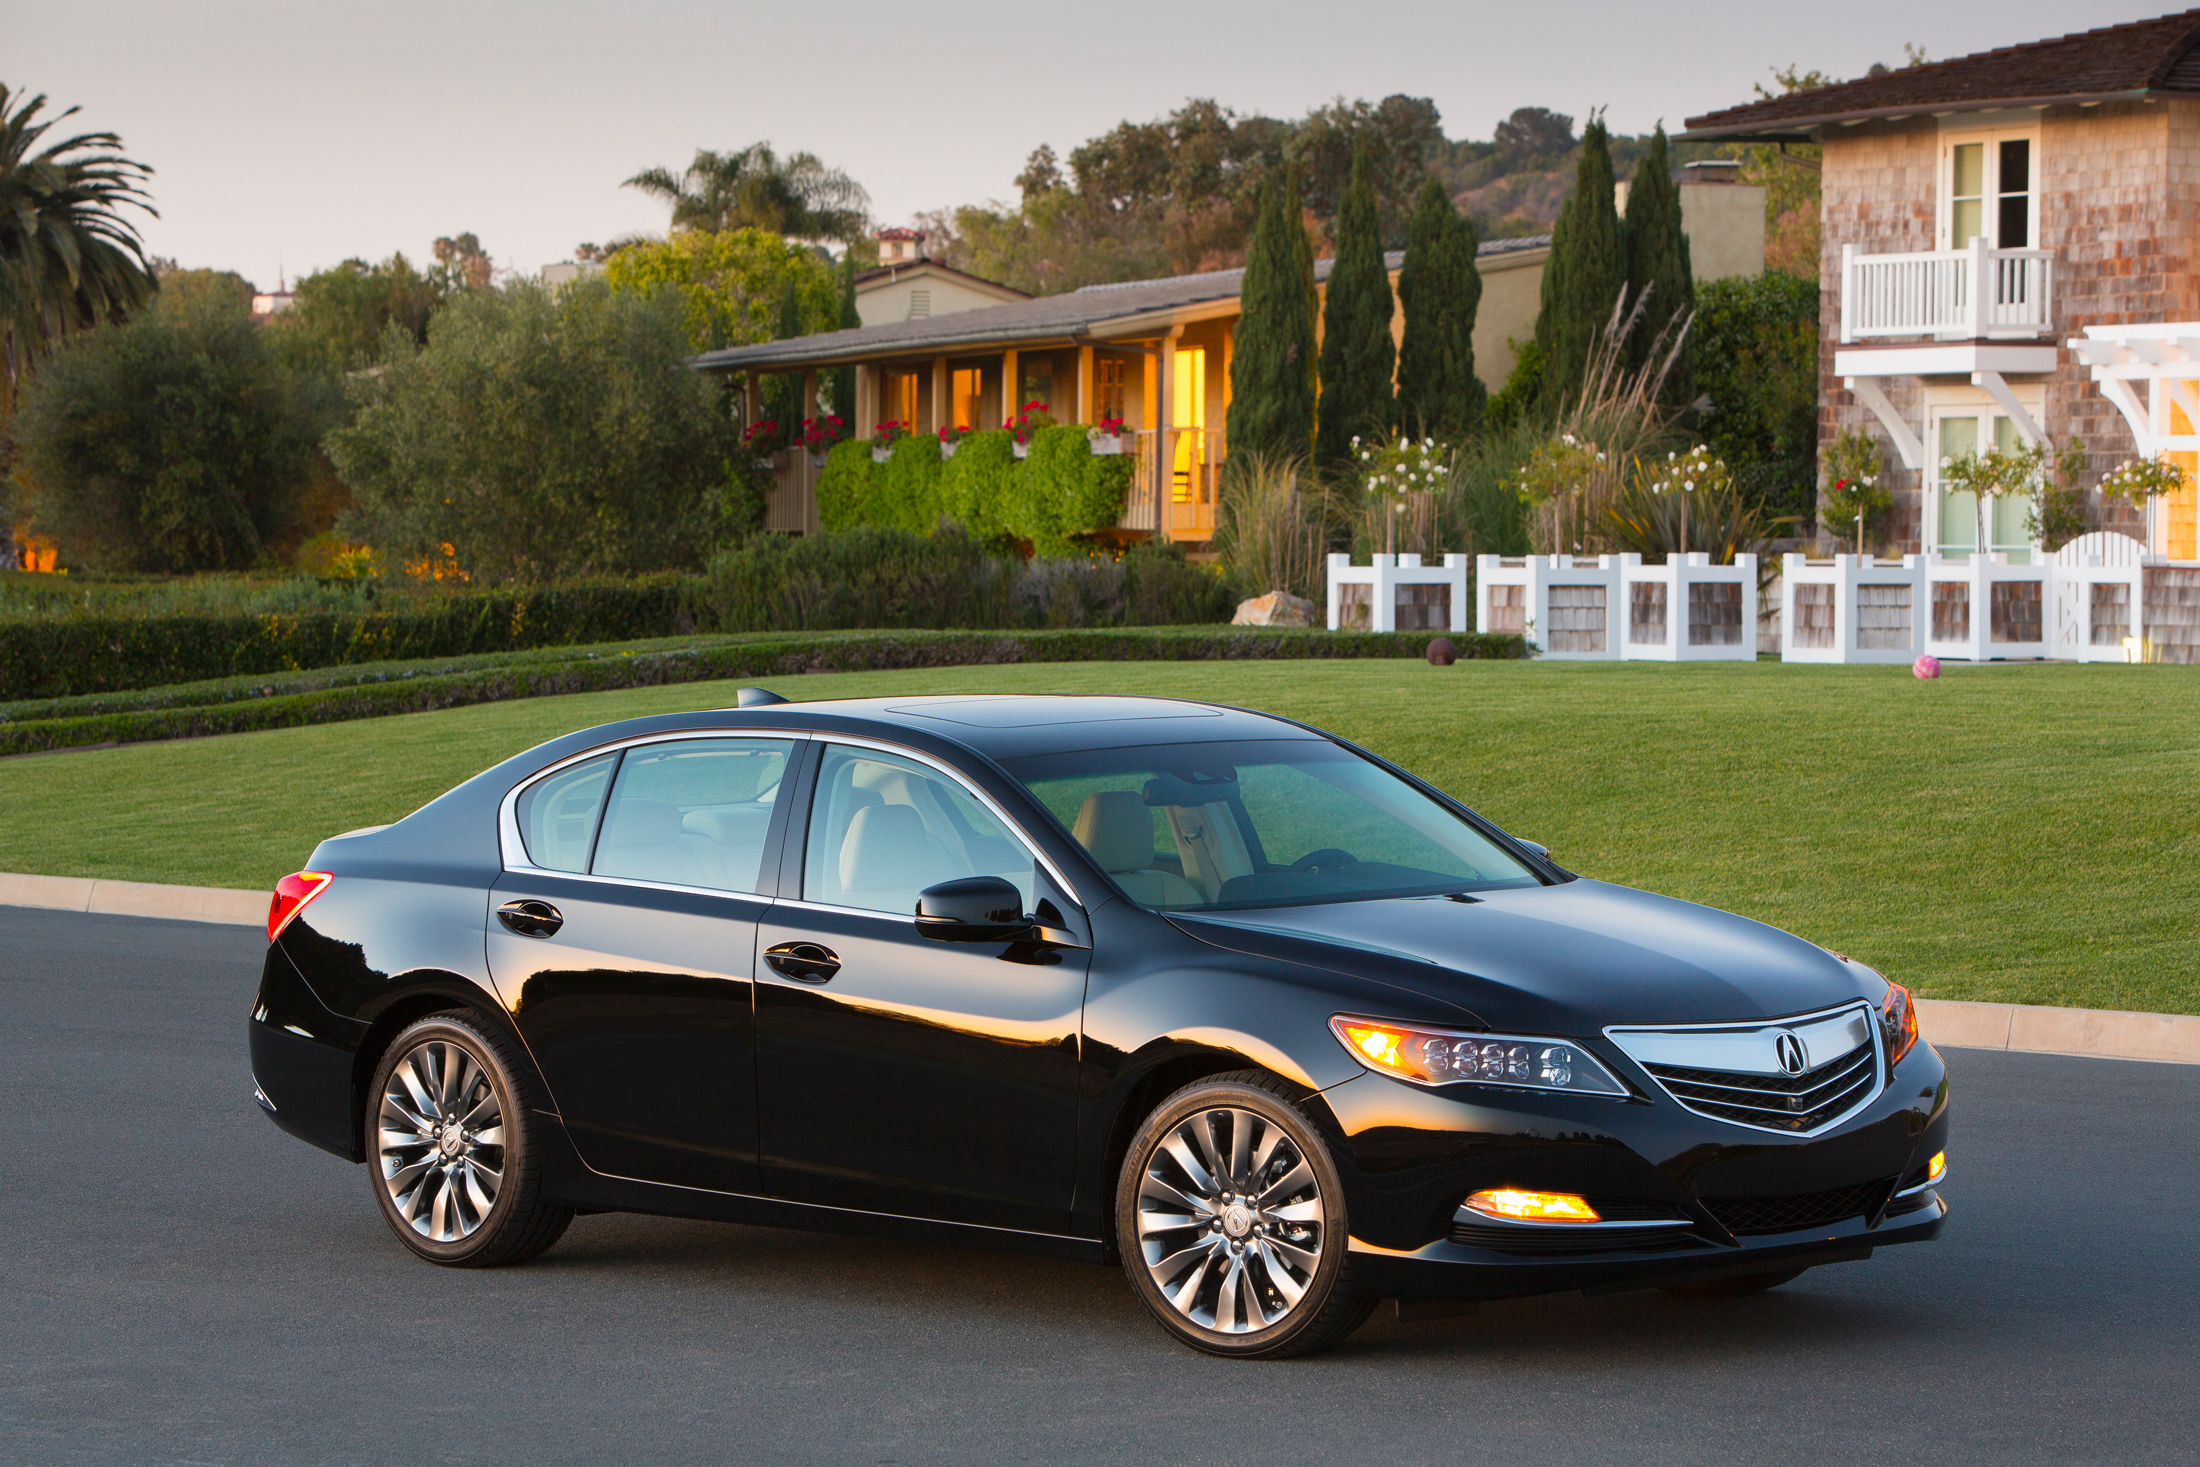 2016 Acura RLX Safety Ratings: Five Stars from NHTSA » AutoGuide.com News